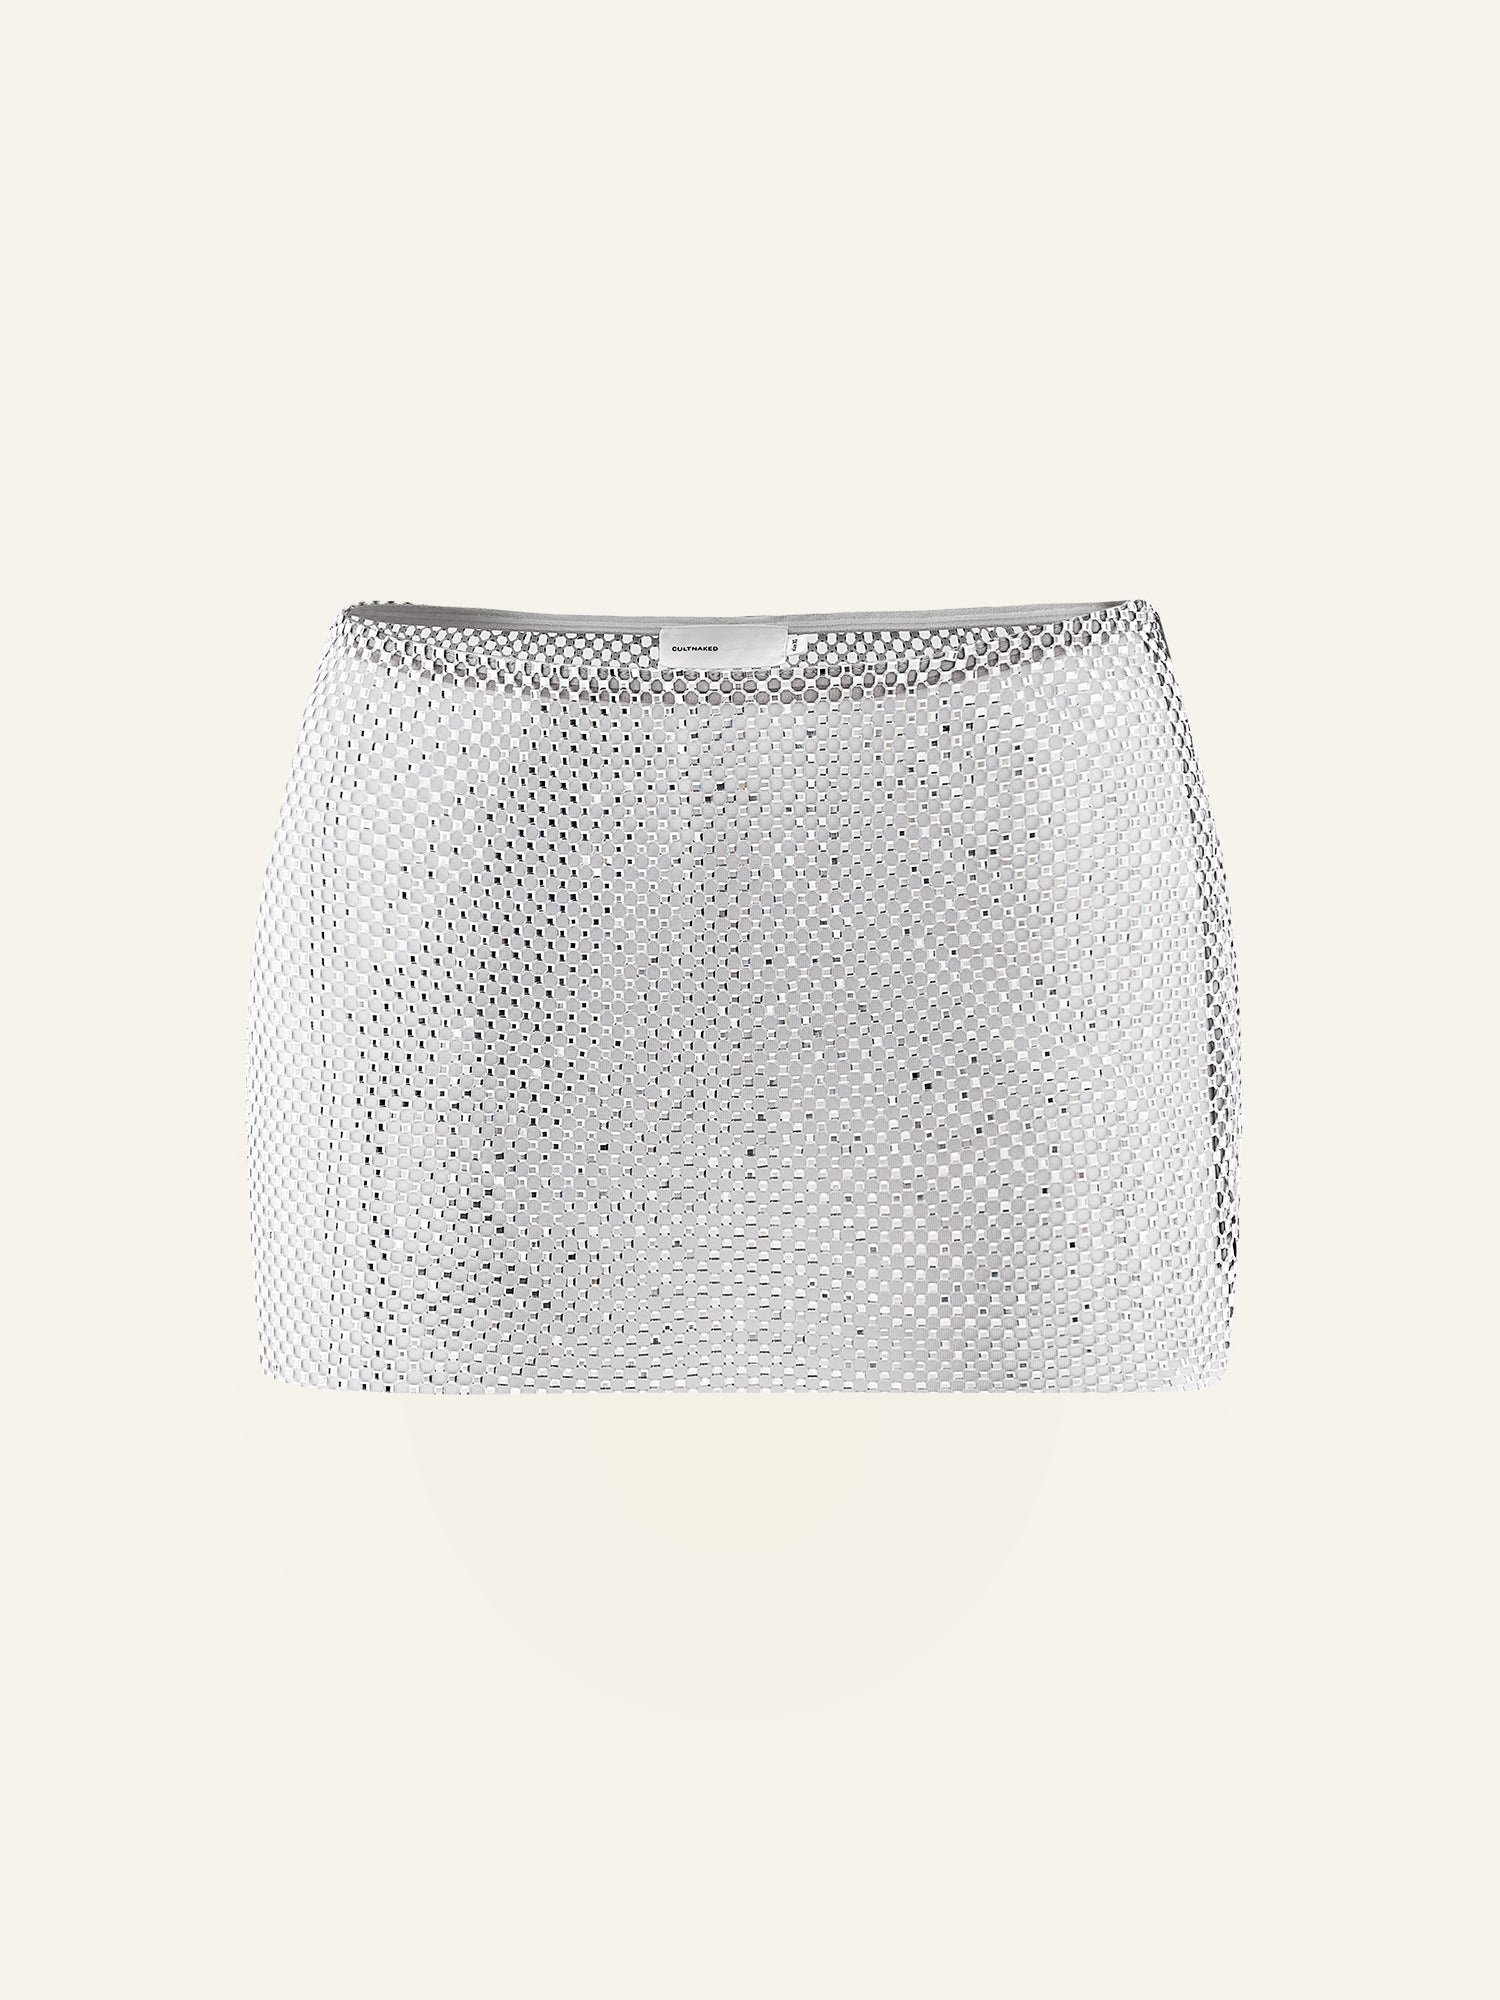 Product photo of a grey net mini skirt decorated with rhinestones